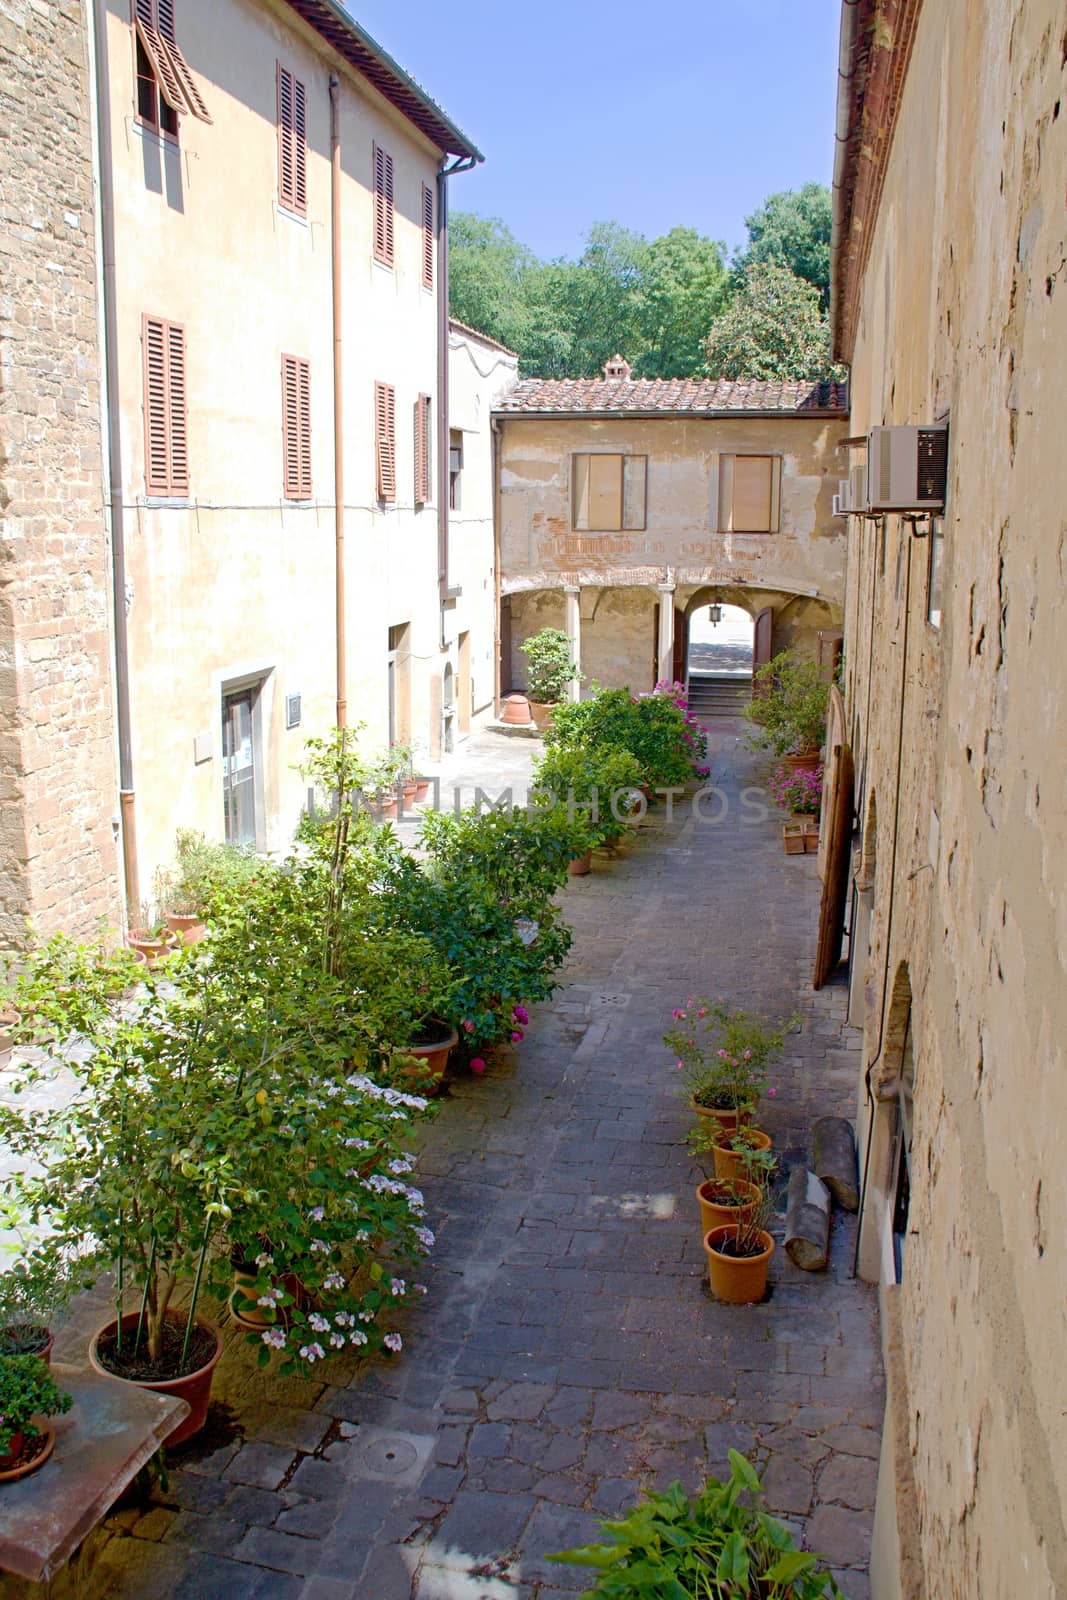 Photo shows a detail of Firenze city street and houses.